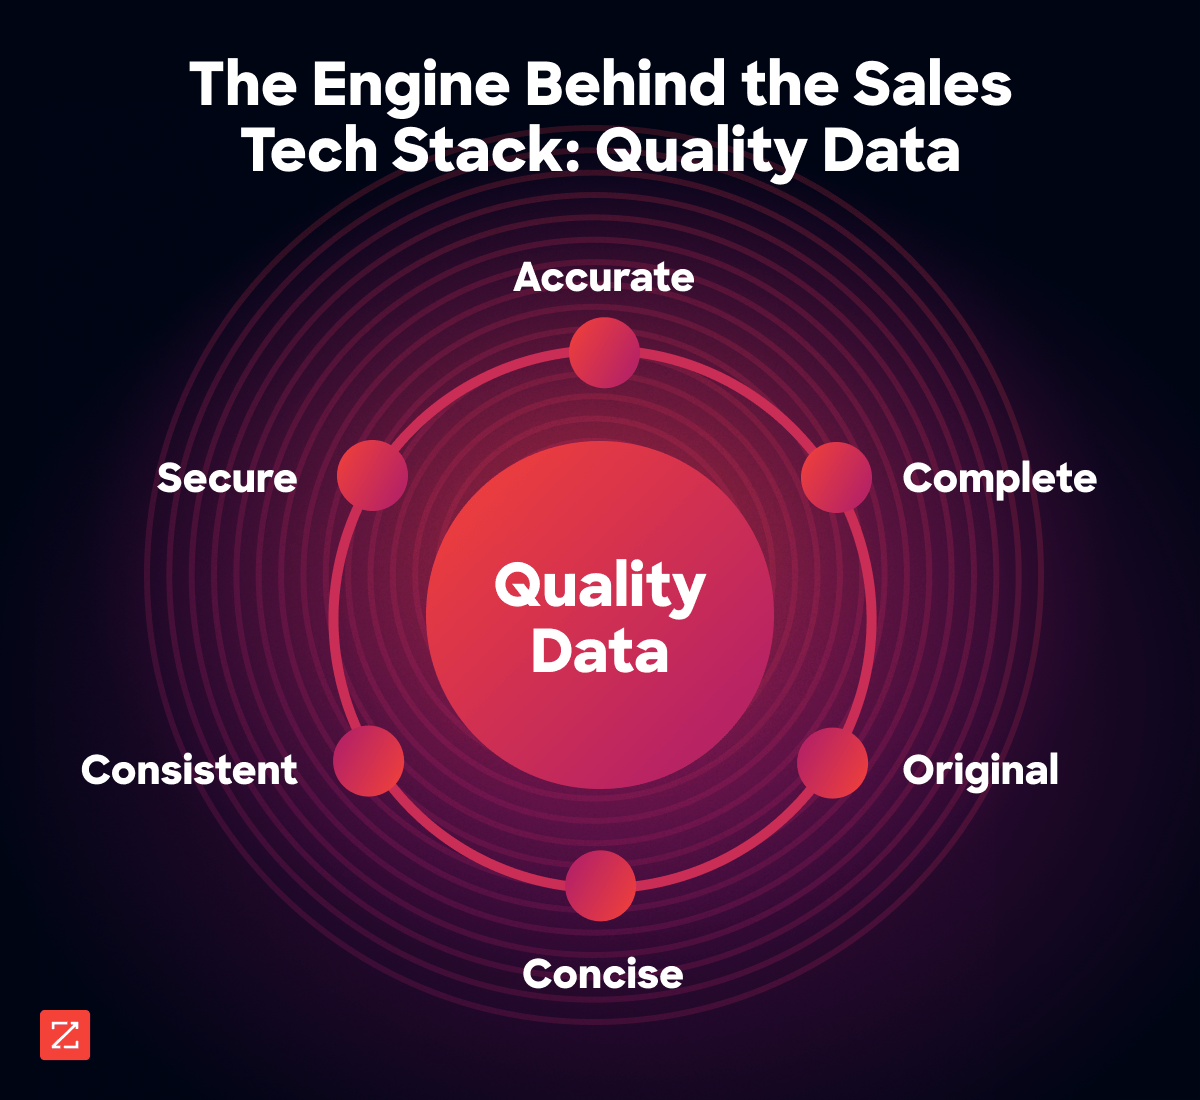 Quality data is accurate, complete, original, concise, consistent, and secure